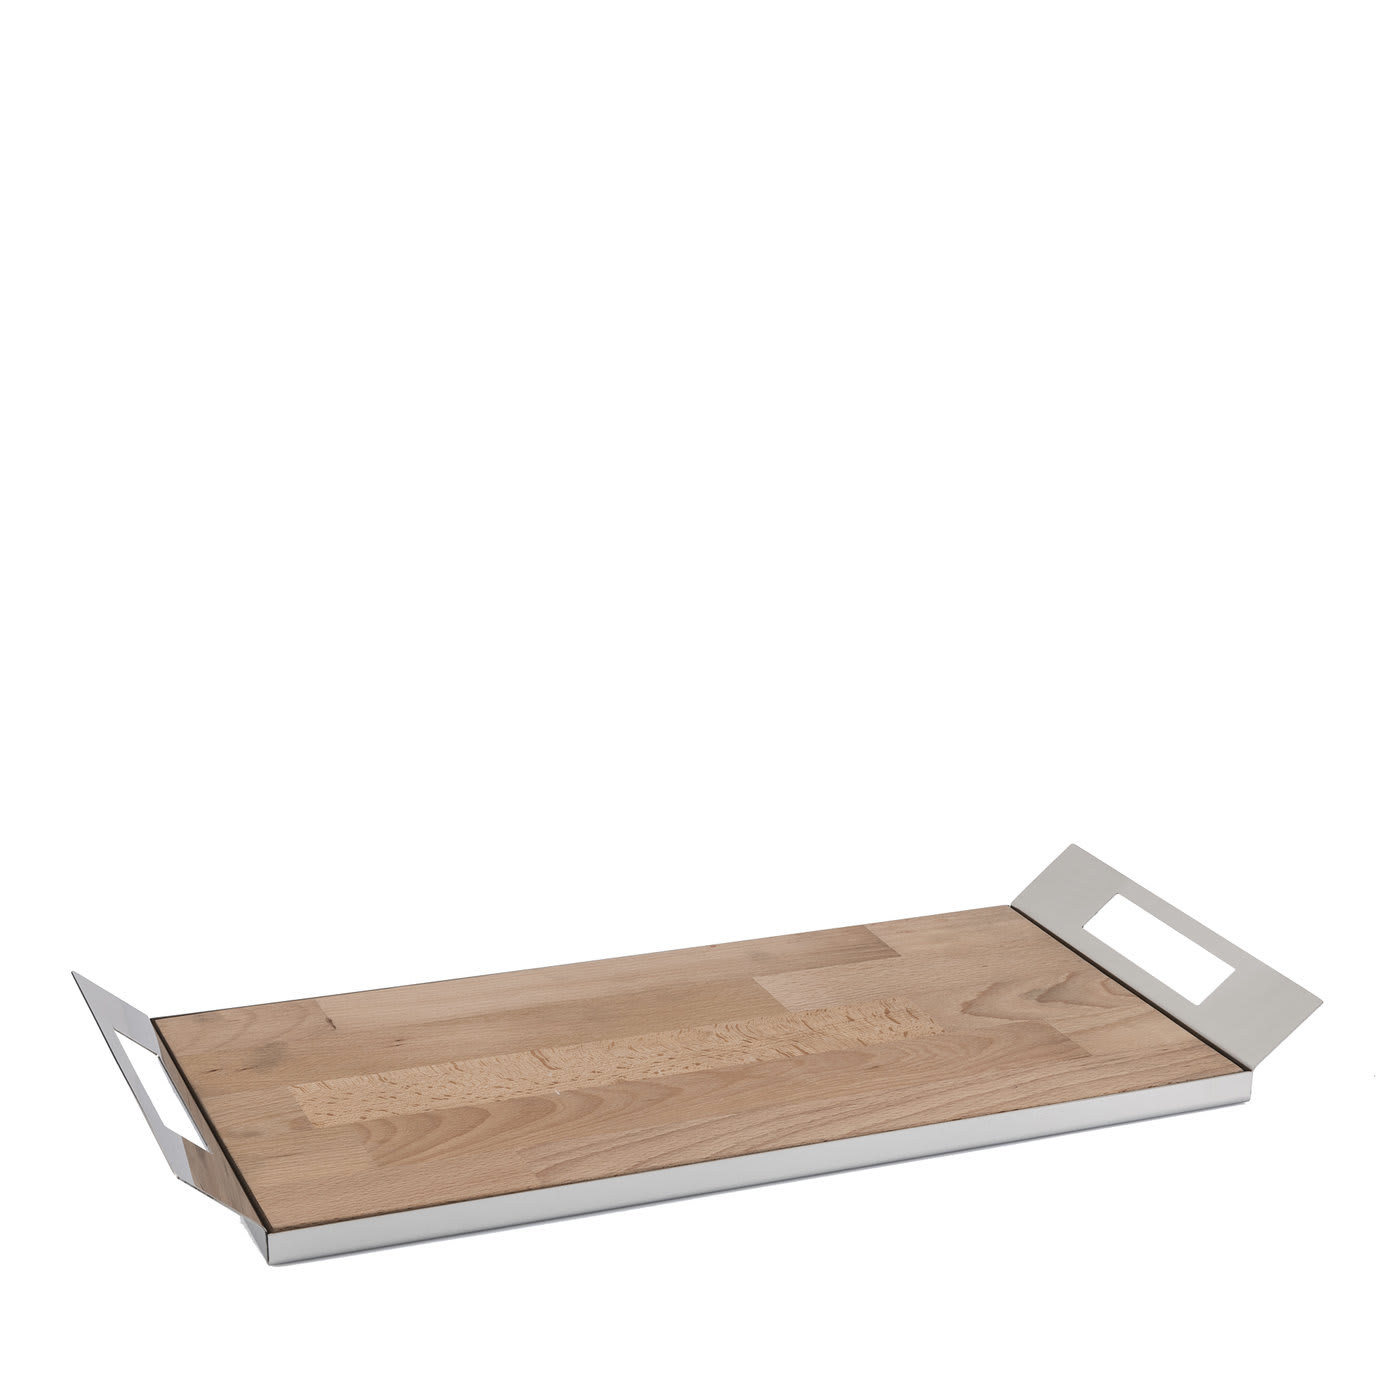 Serving Tray in Stainless Steel and Wood - Elleffe Design